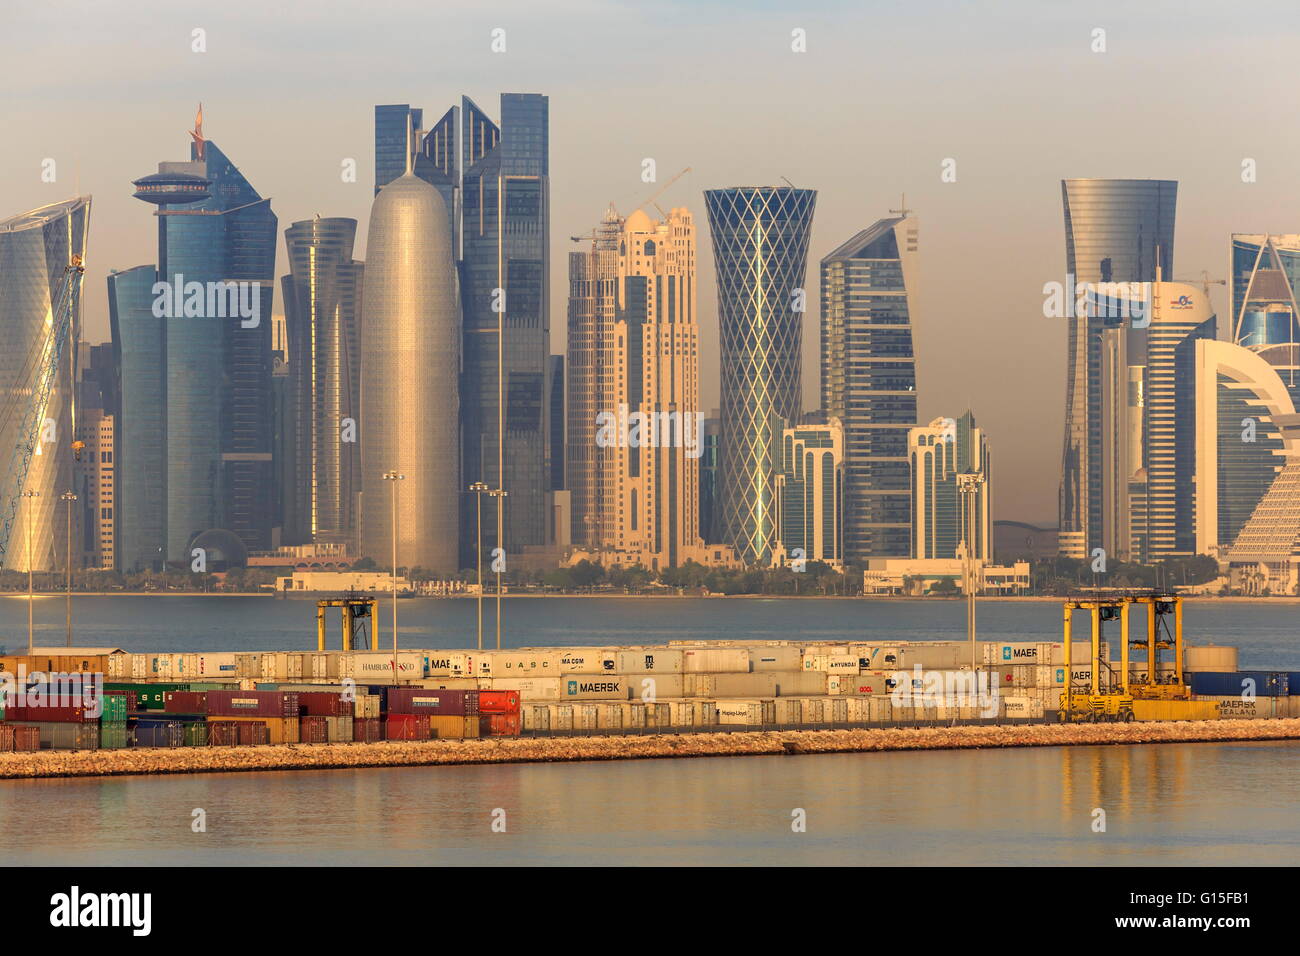 Futuristic Doha city skyline and container port, Doha, Qatar, Middle East Stock Photo